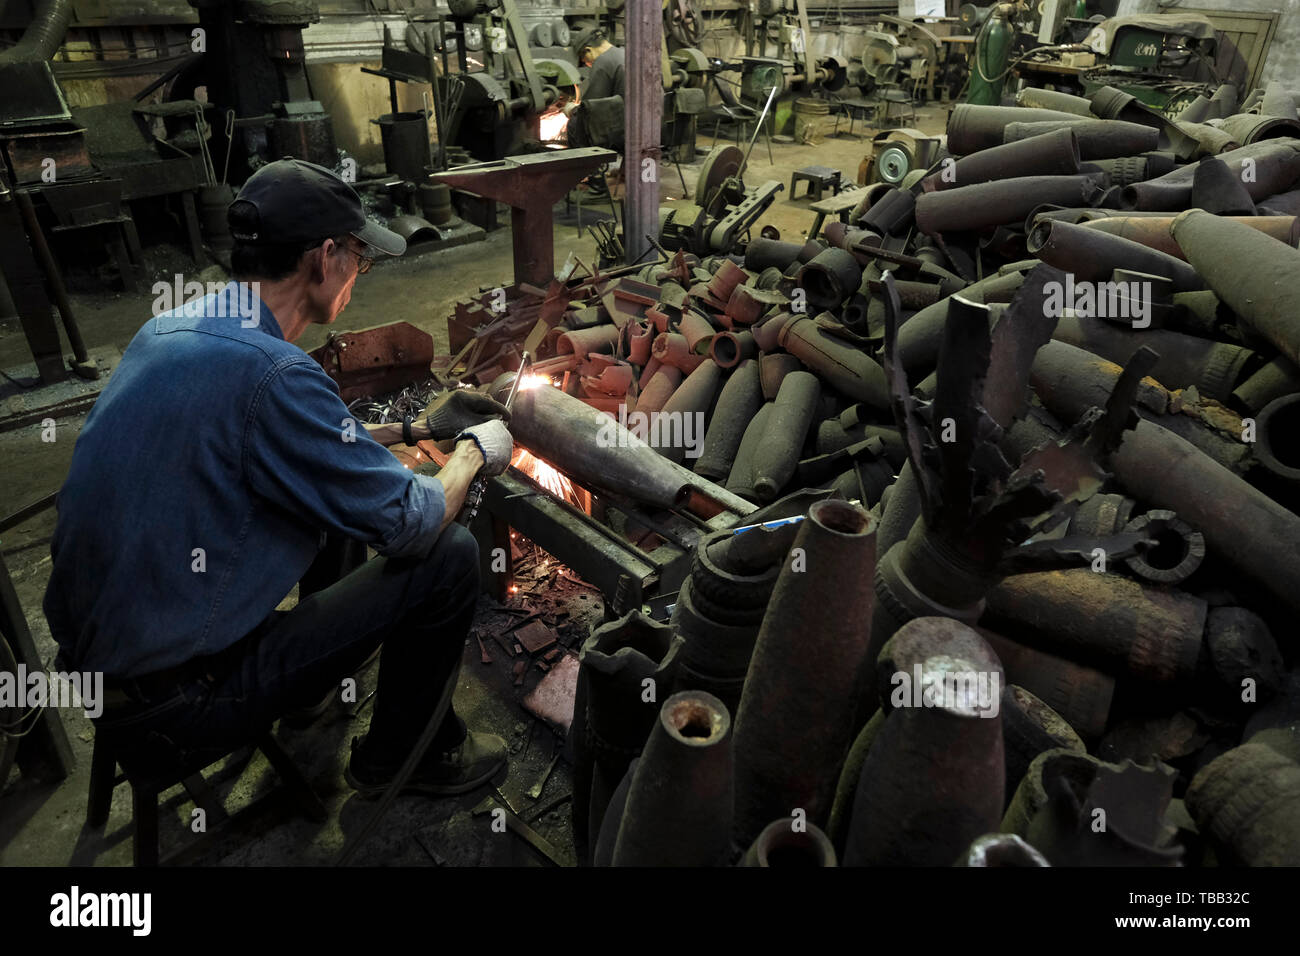 https://c8.alamy.com/comp/TBB32C/taiwanese-blacksmith-wu-tseng-tong-known-as-maestro-wu-crafts-a-knife-from-recovered-artillery-shells-in-kinmen-county-or-island-few-miles-from-mainland-china-taiwan-back-in-the-1950s-the-islands-were-heavily-shelled-during-the-two-taiwan-strait-crisesmilitary-clashes-between-the-prc-and-roc-TBB32C.jpg